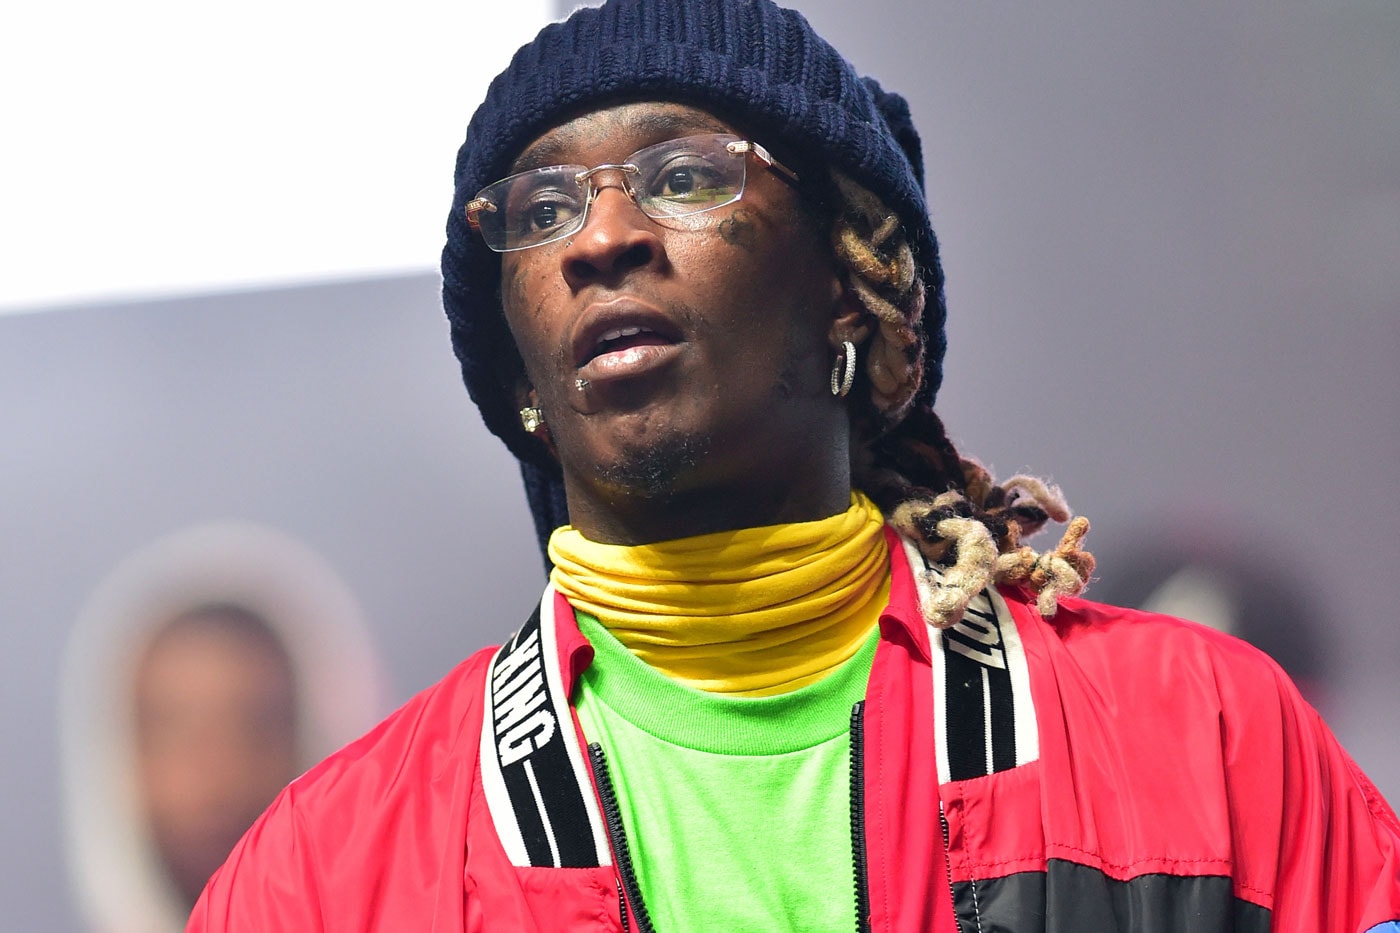 Young Thug Teases Fetty Wap Collaboration